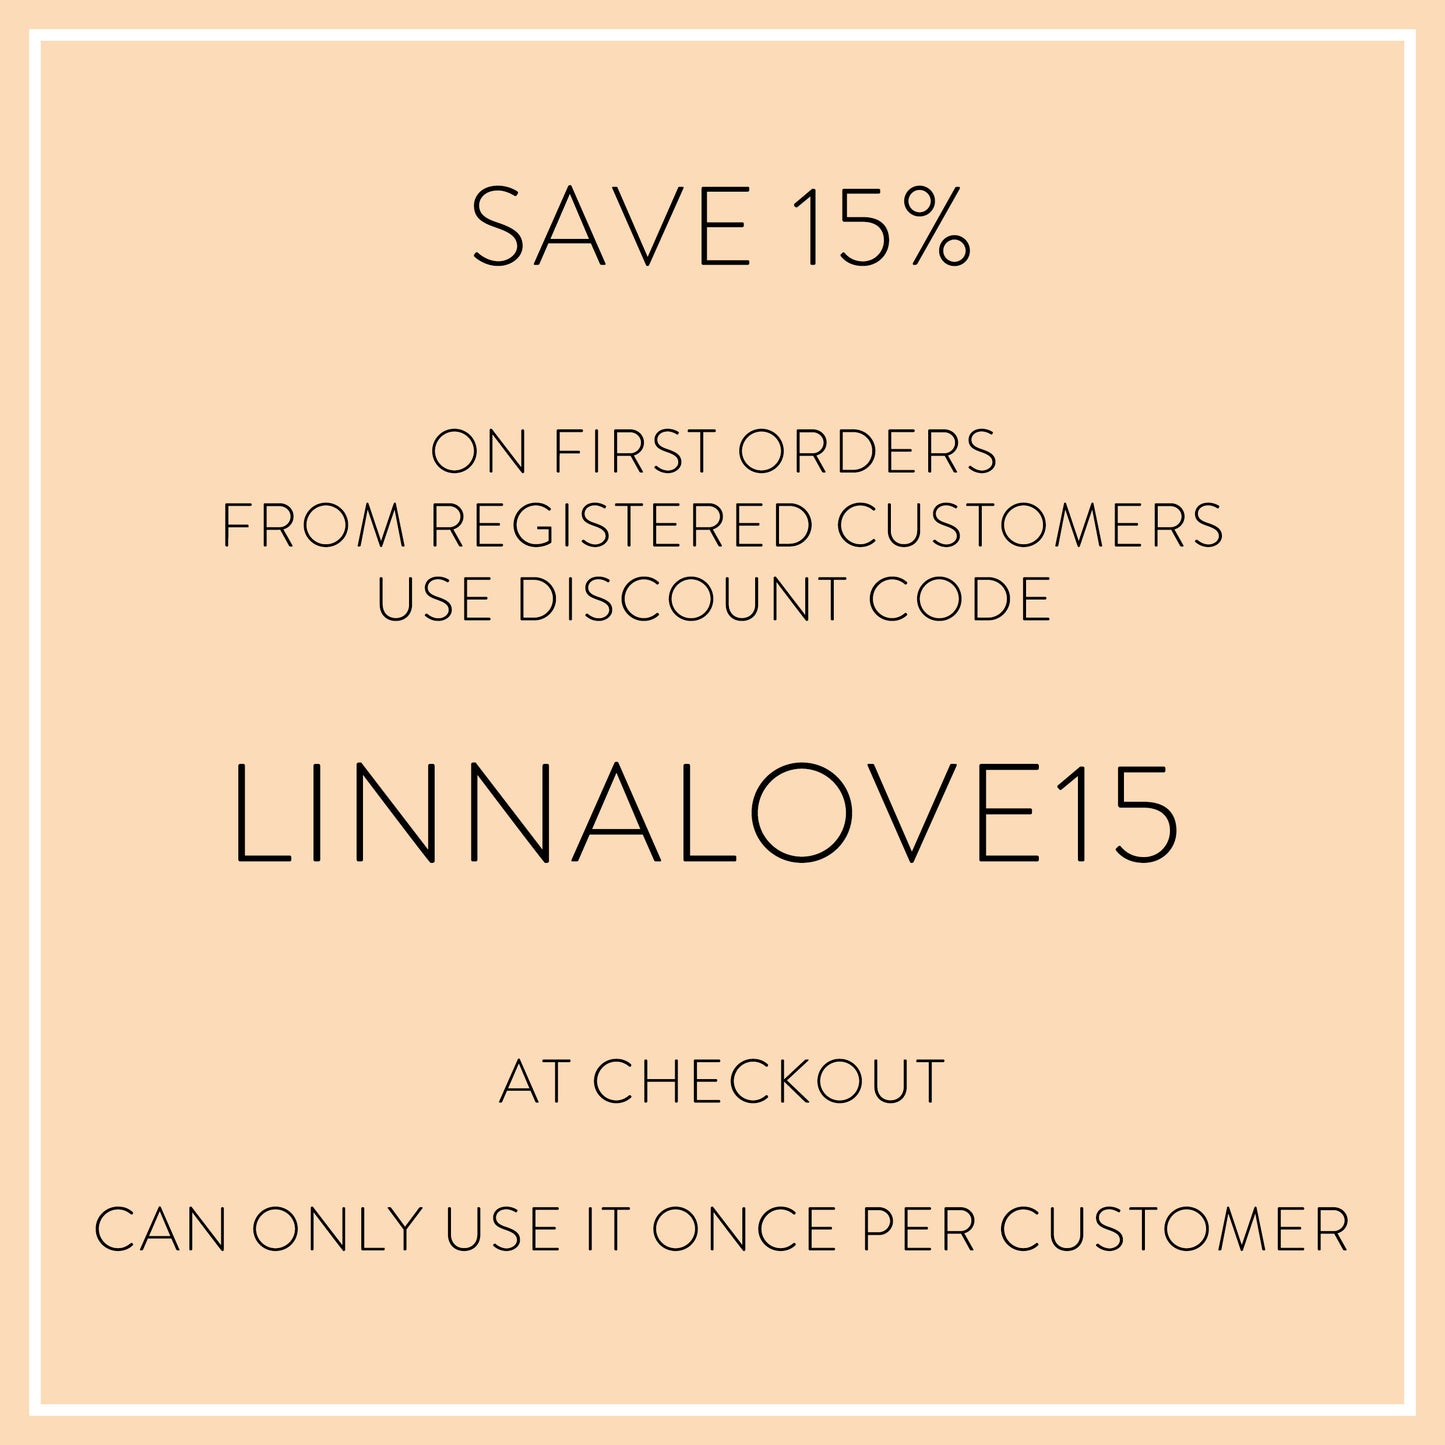 Save 15%   on first orders  from registered customers Use discount code   LINNALOVE15   at checkout  can only use it once per customer